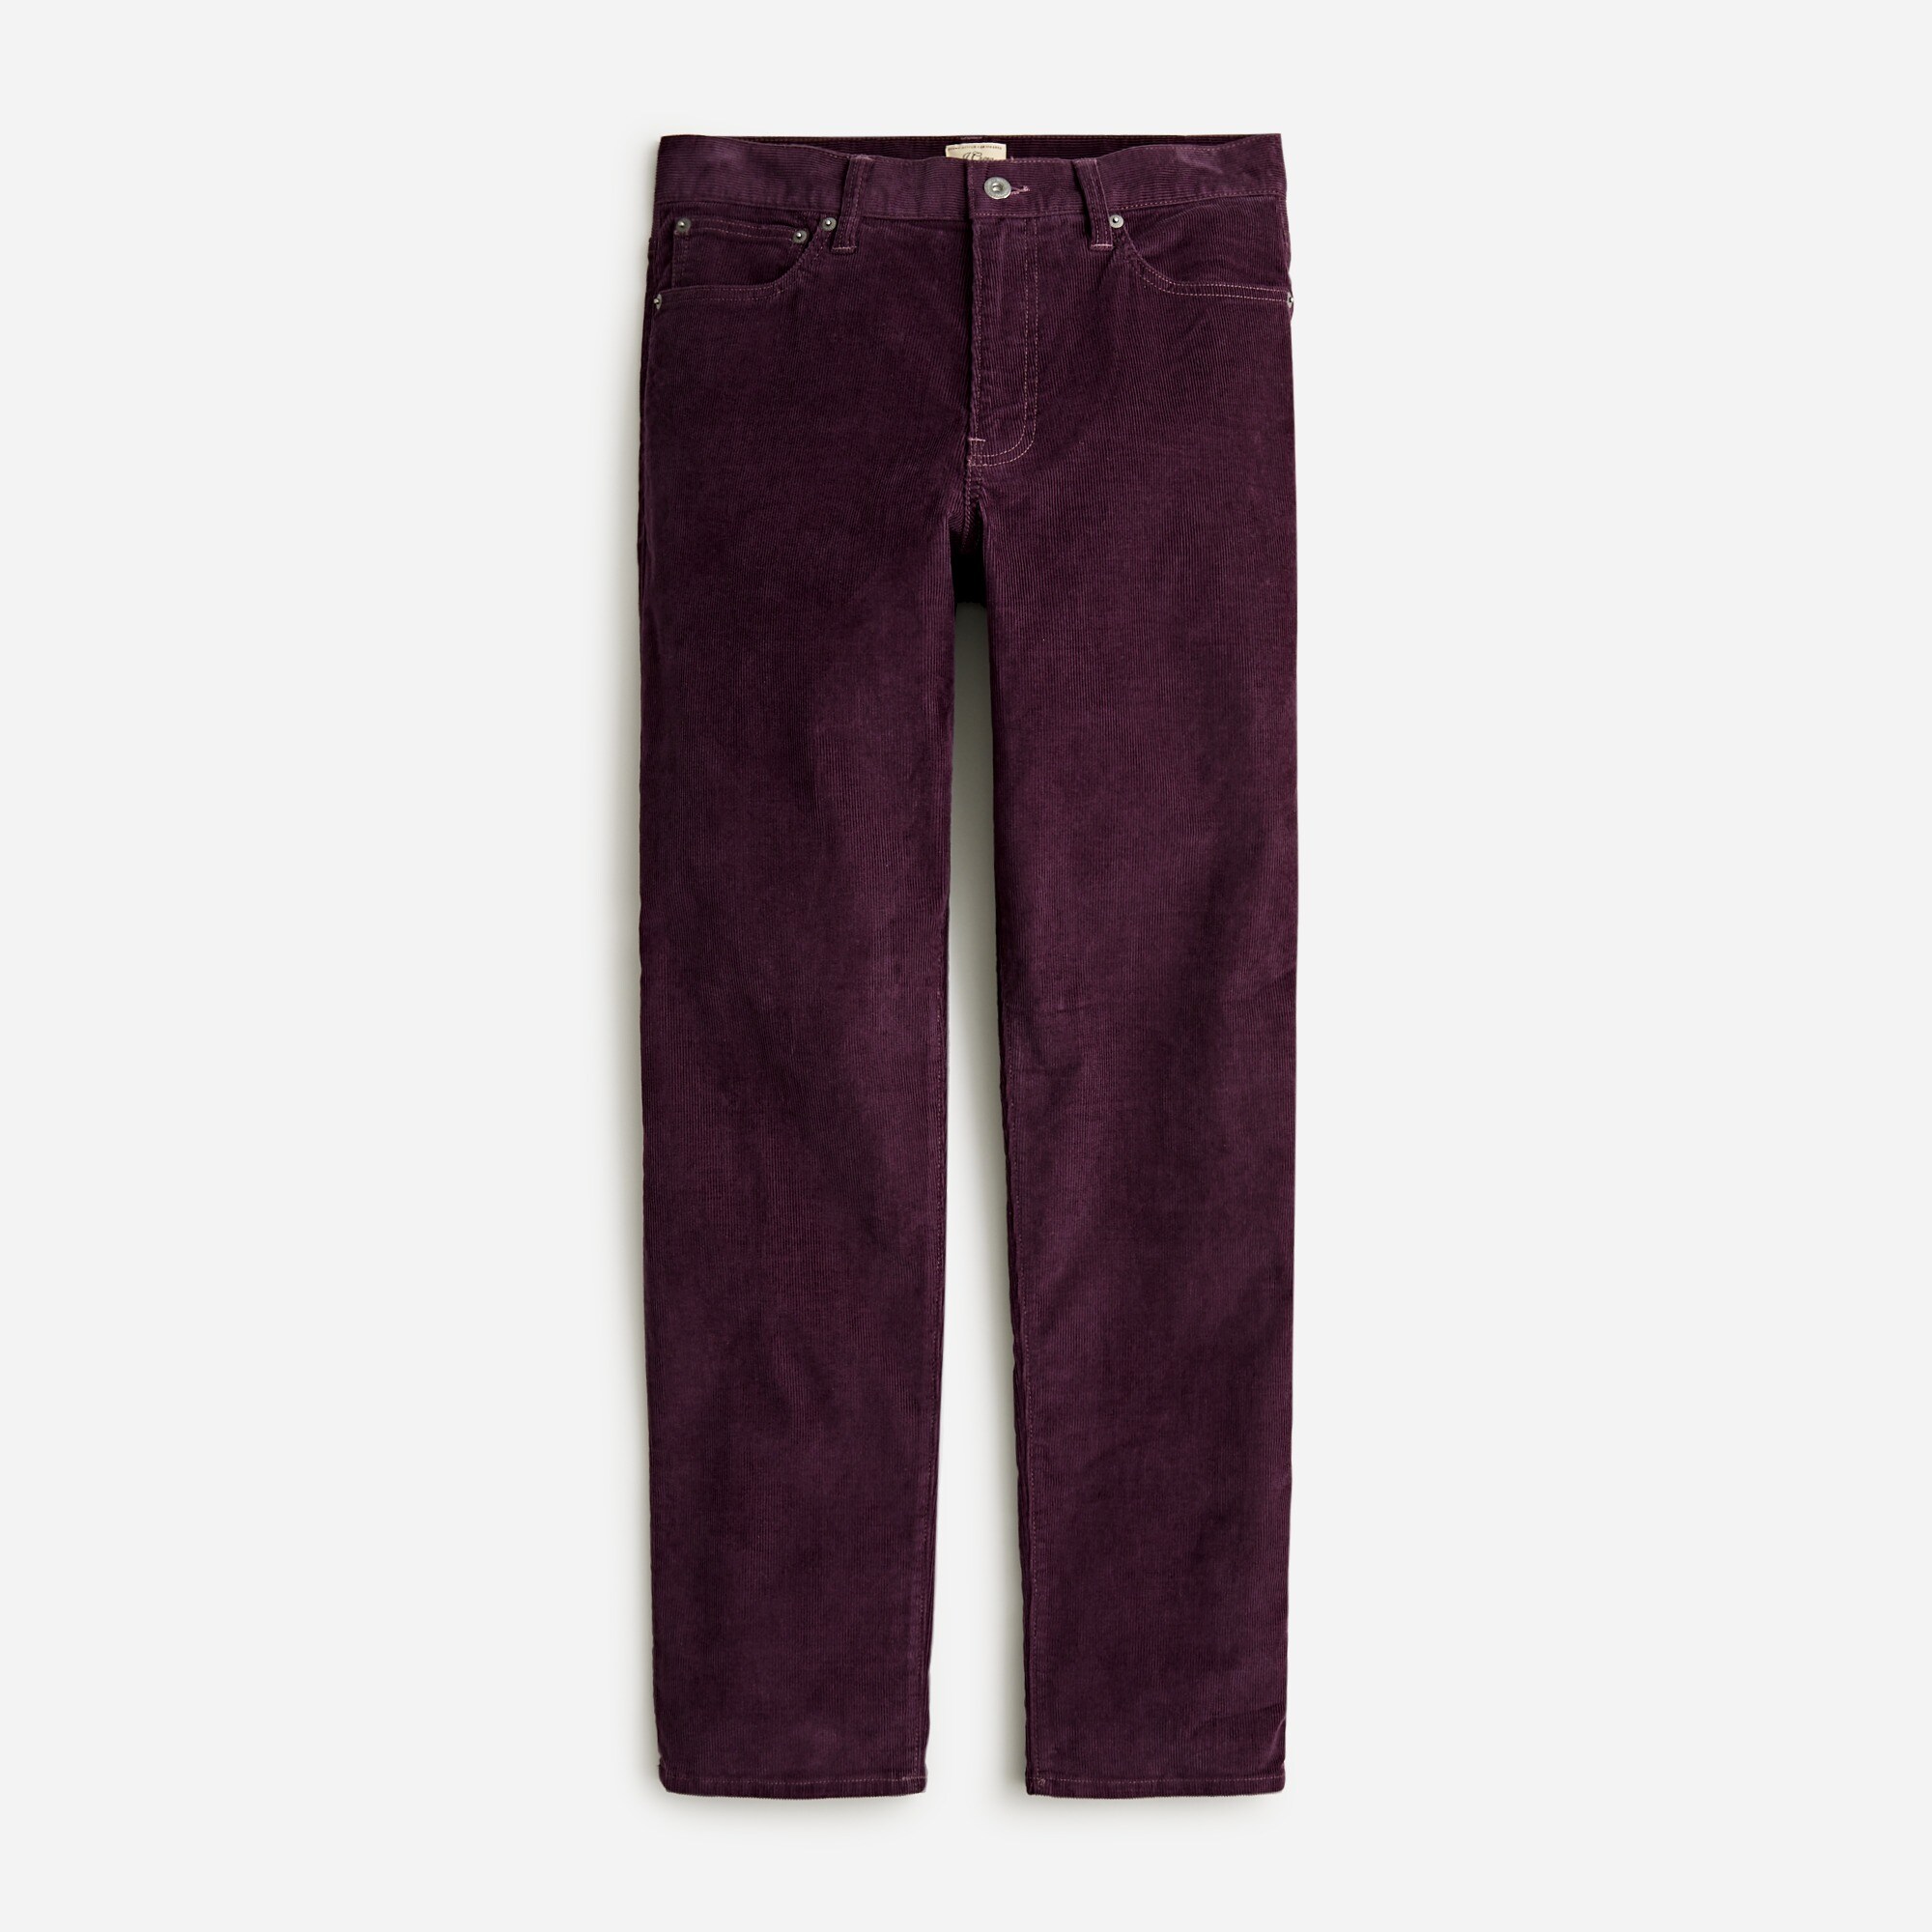  Classic Straight-fit pant in stretch corduroy